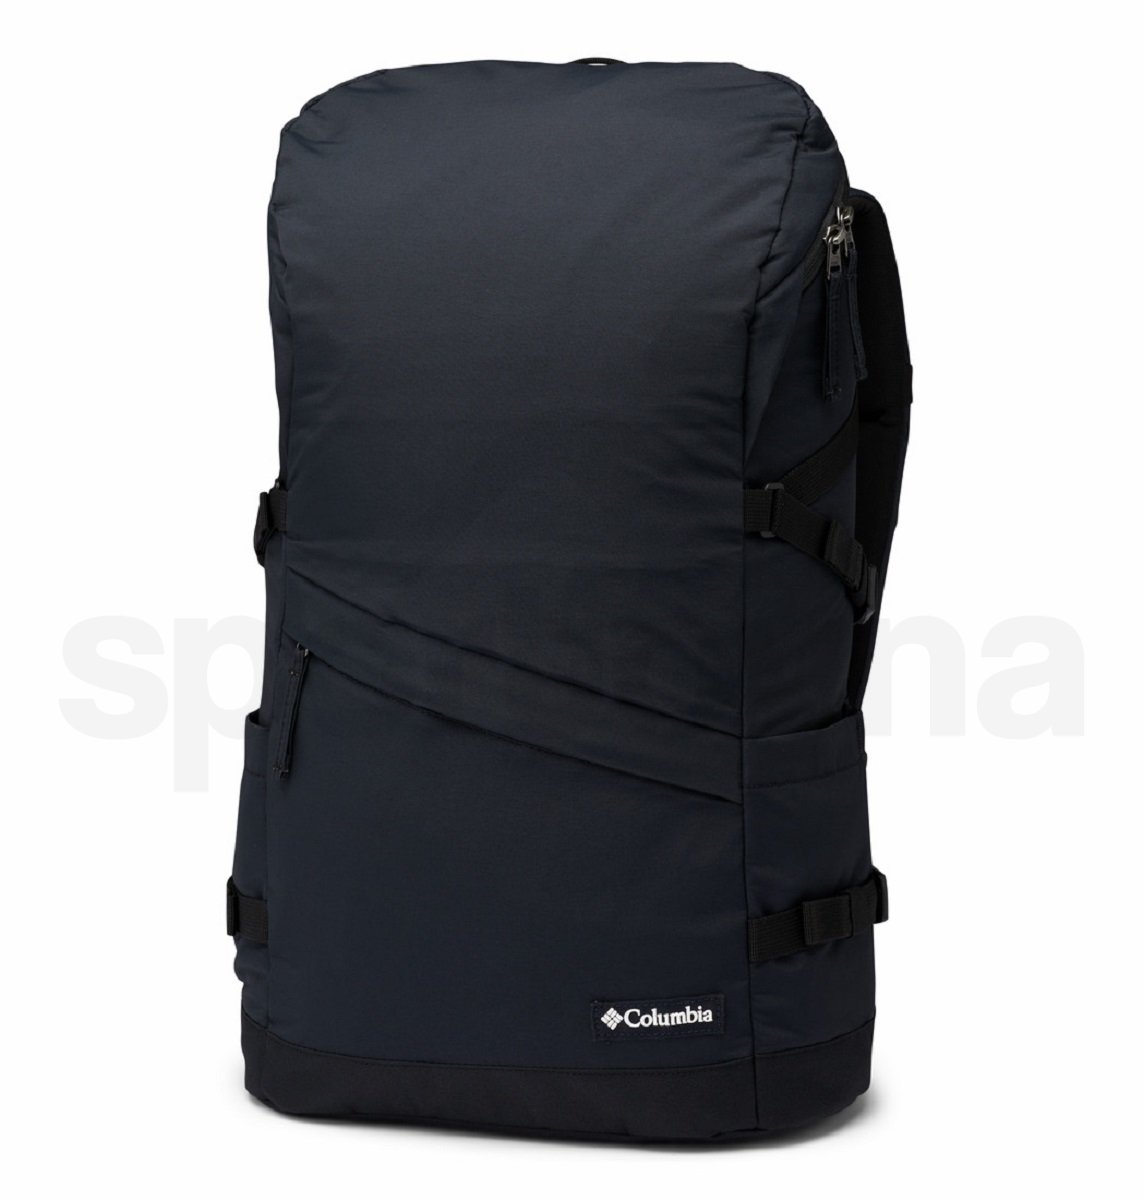 Columbia_Falmouth™_24L_Backpack1910001_011